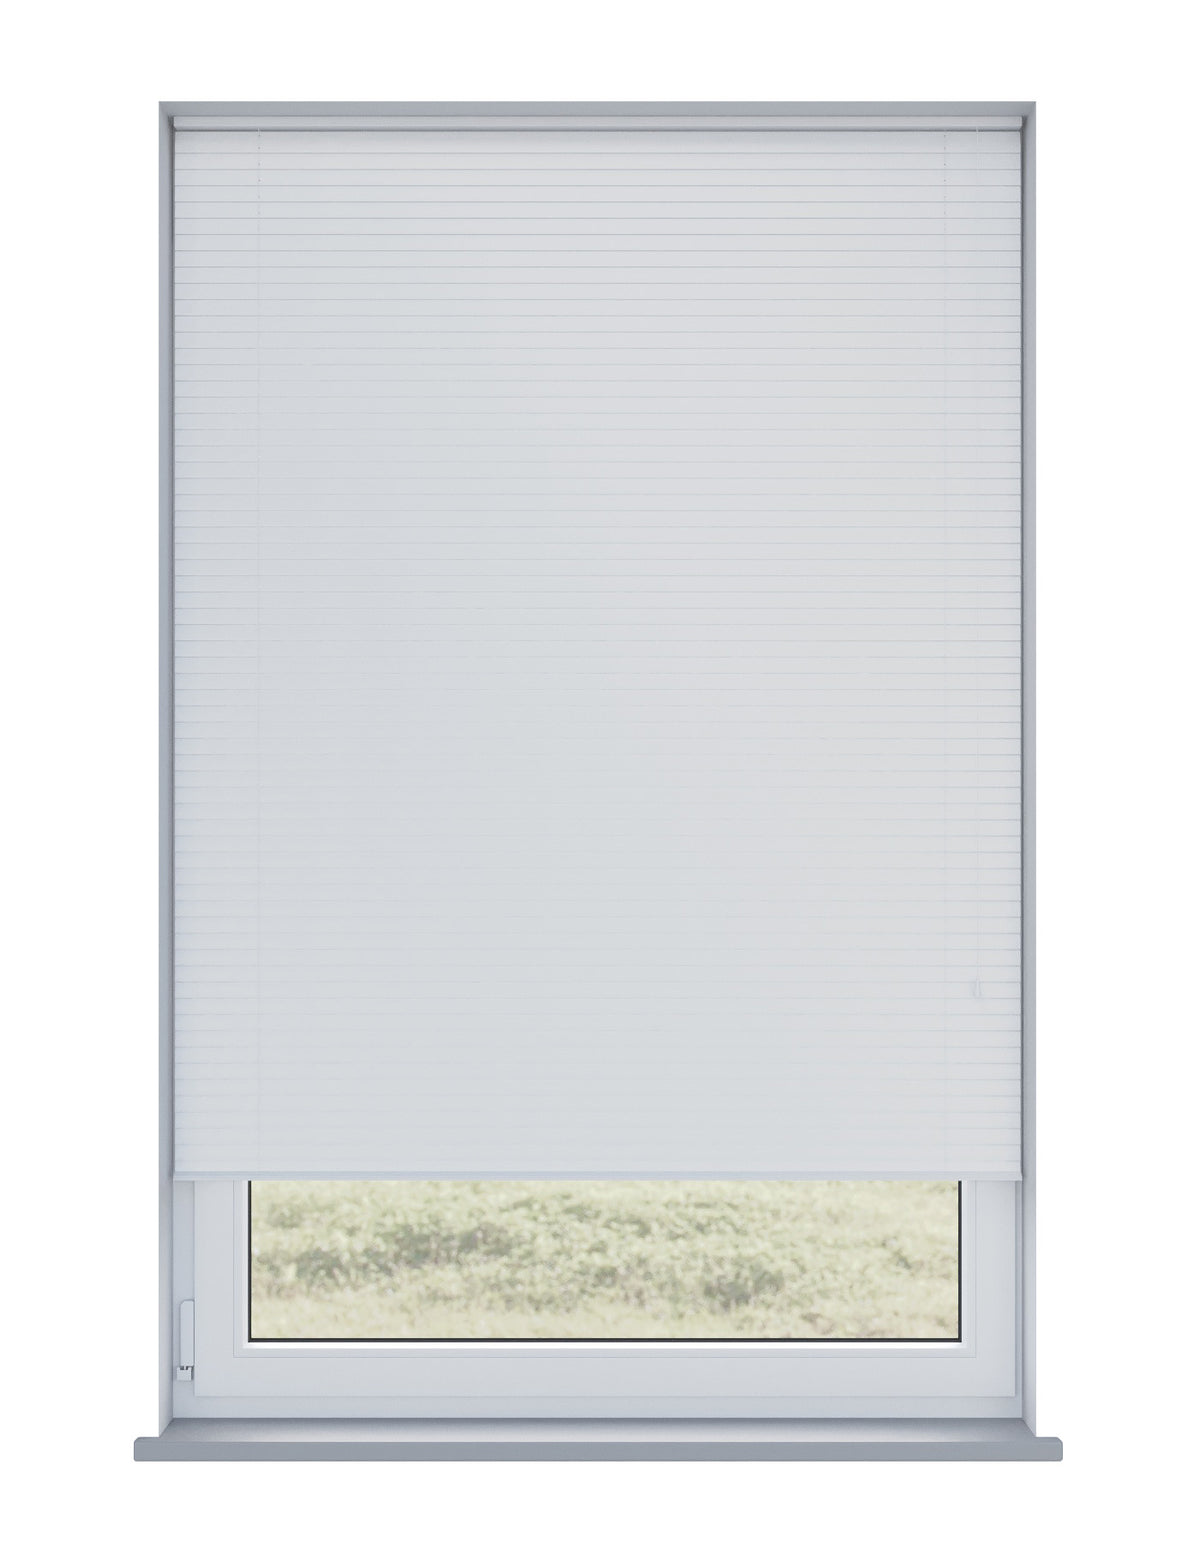 Expressions Radiance White Wooden Blind